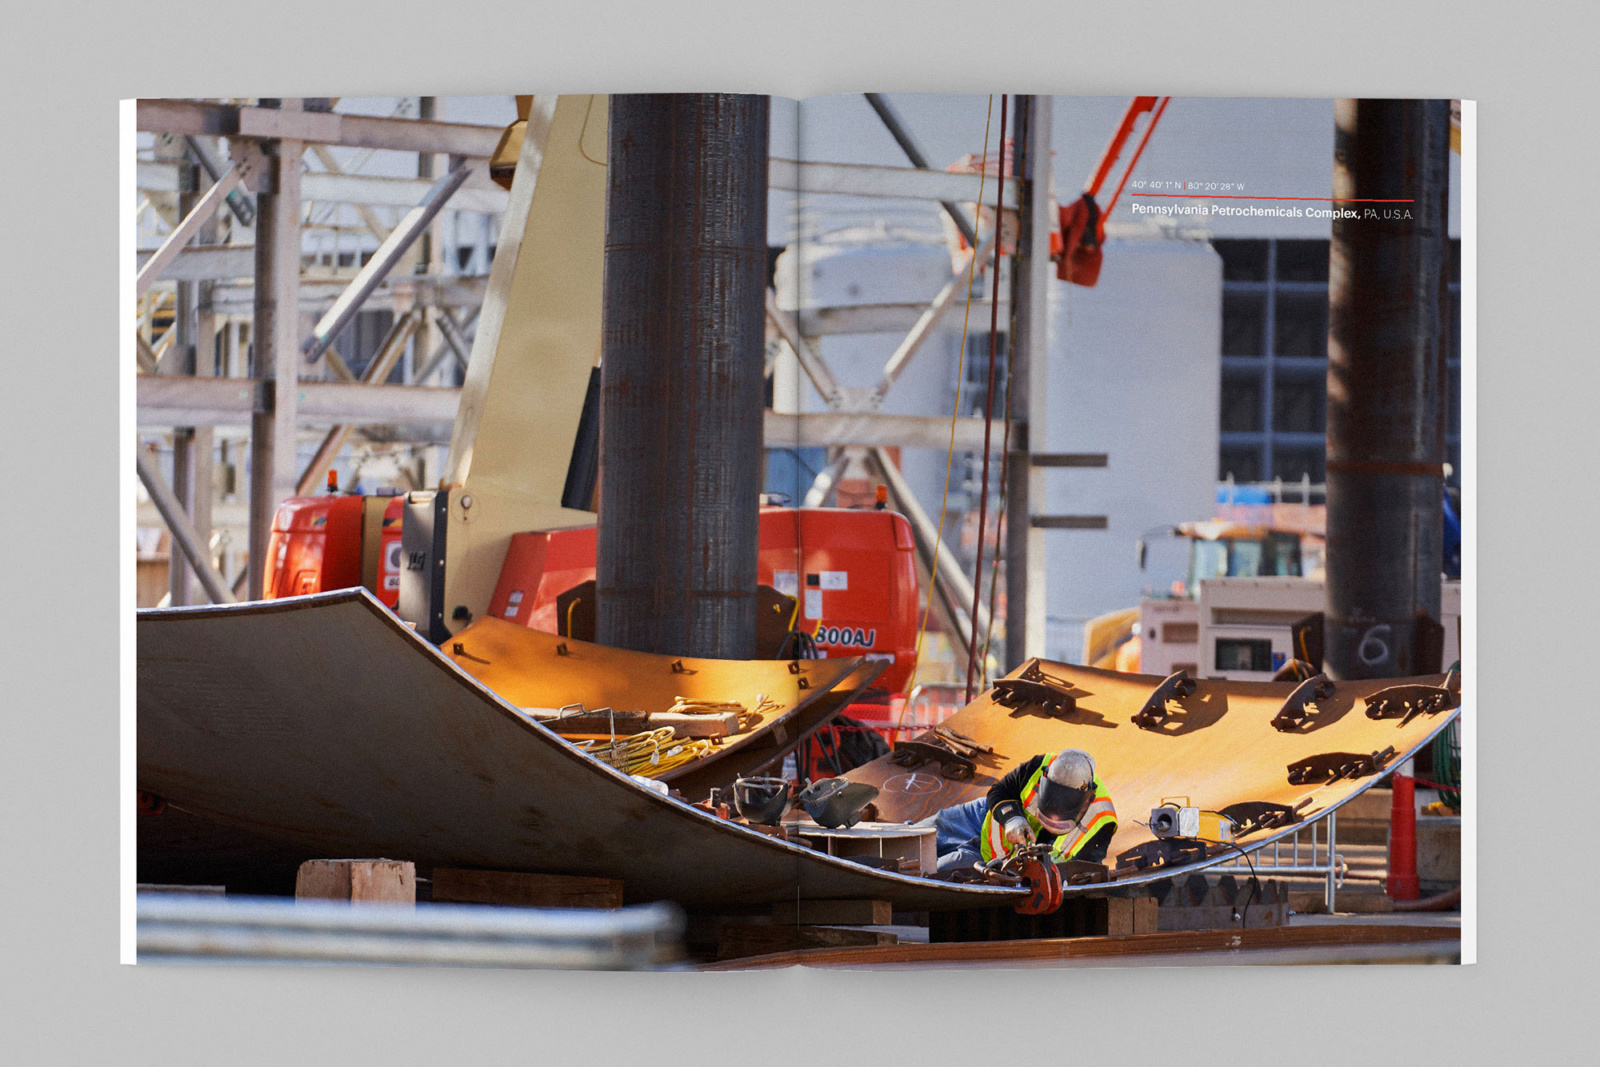 Full-bleed spread showing photograph of Bechtel worker at the Pennsylvania Petrochemicals Complex in the annual report design